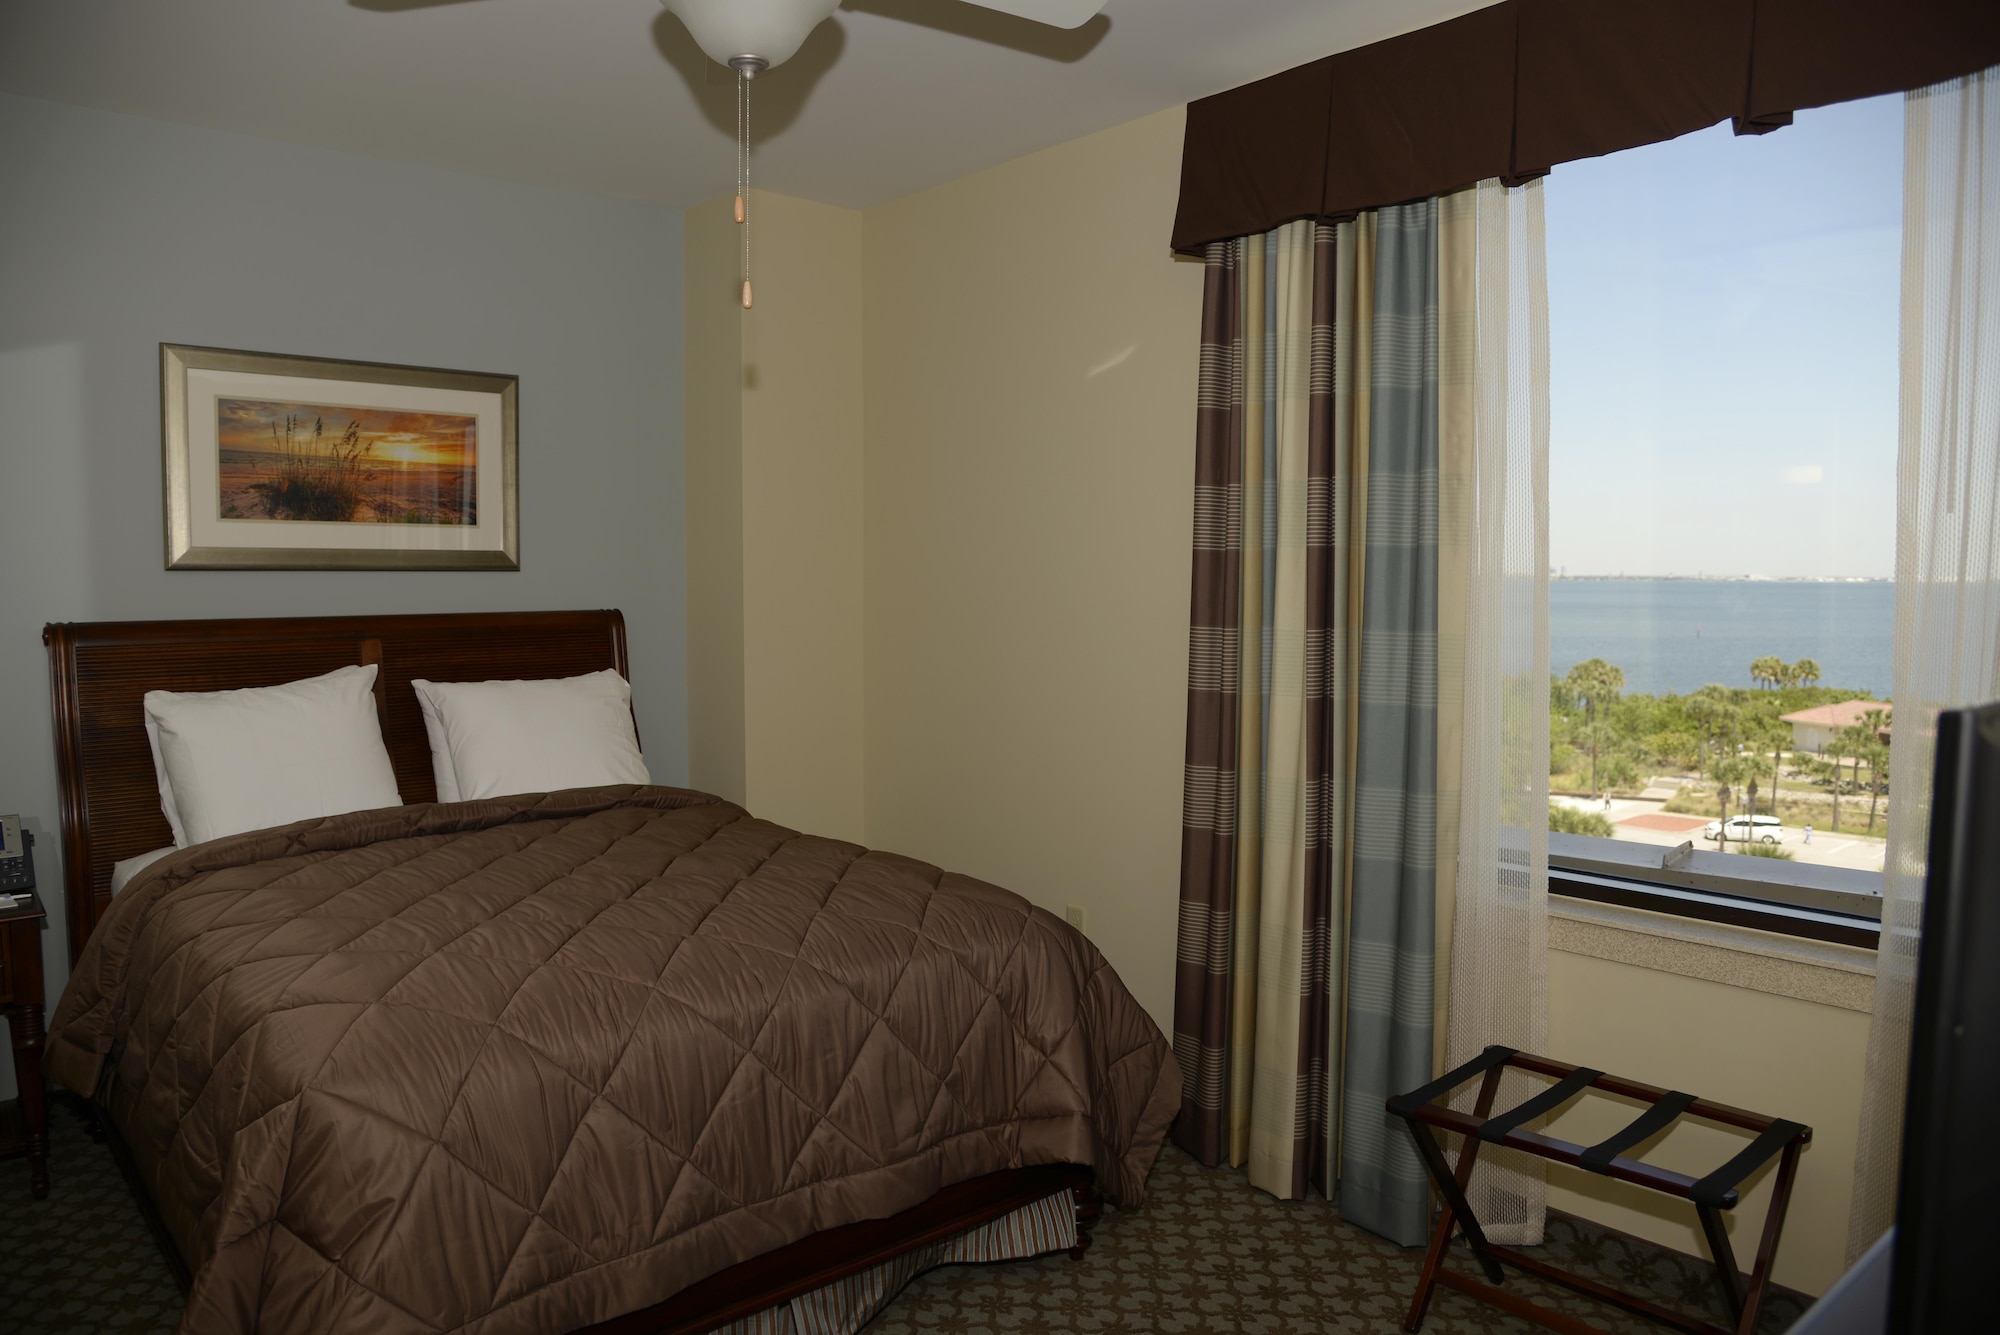 A general officer’s suite in the new MacDill Inn on MacDill Air Force Base, Florida, overlooks Tampa Bay. The two general officers suites feature a living room, upgraded kitchenette, bedroom and a spacious bathroom. (U.S. Air Force photo/Tech. Sgt. Krystie Martinez/Released)